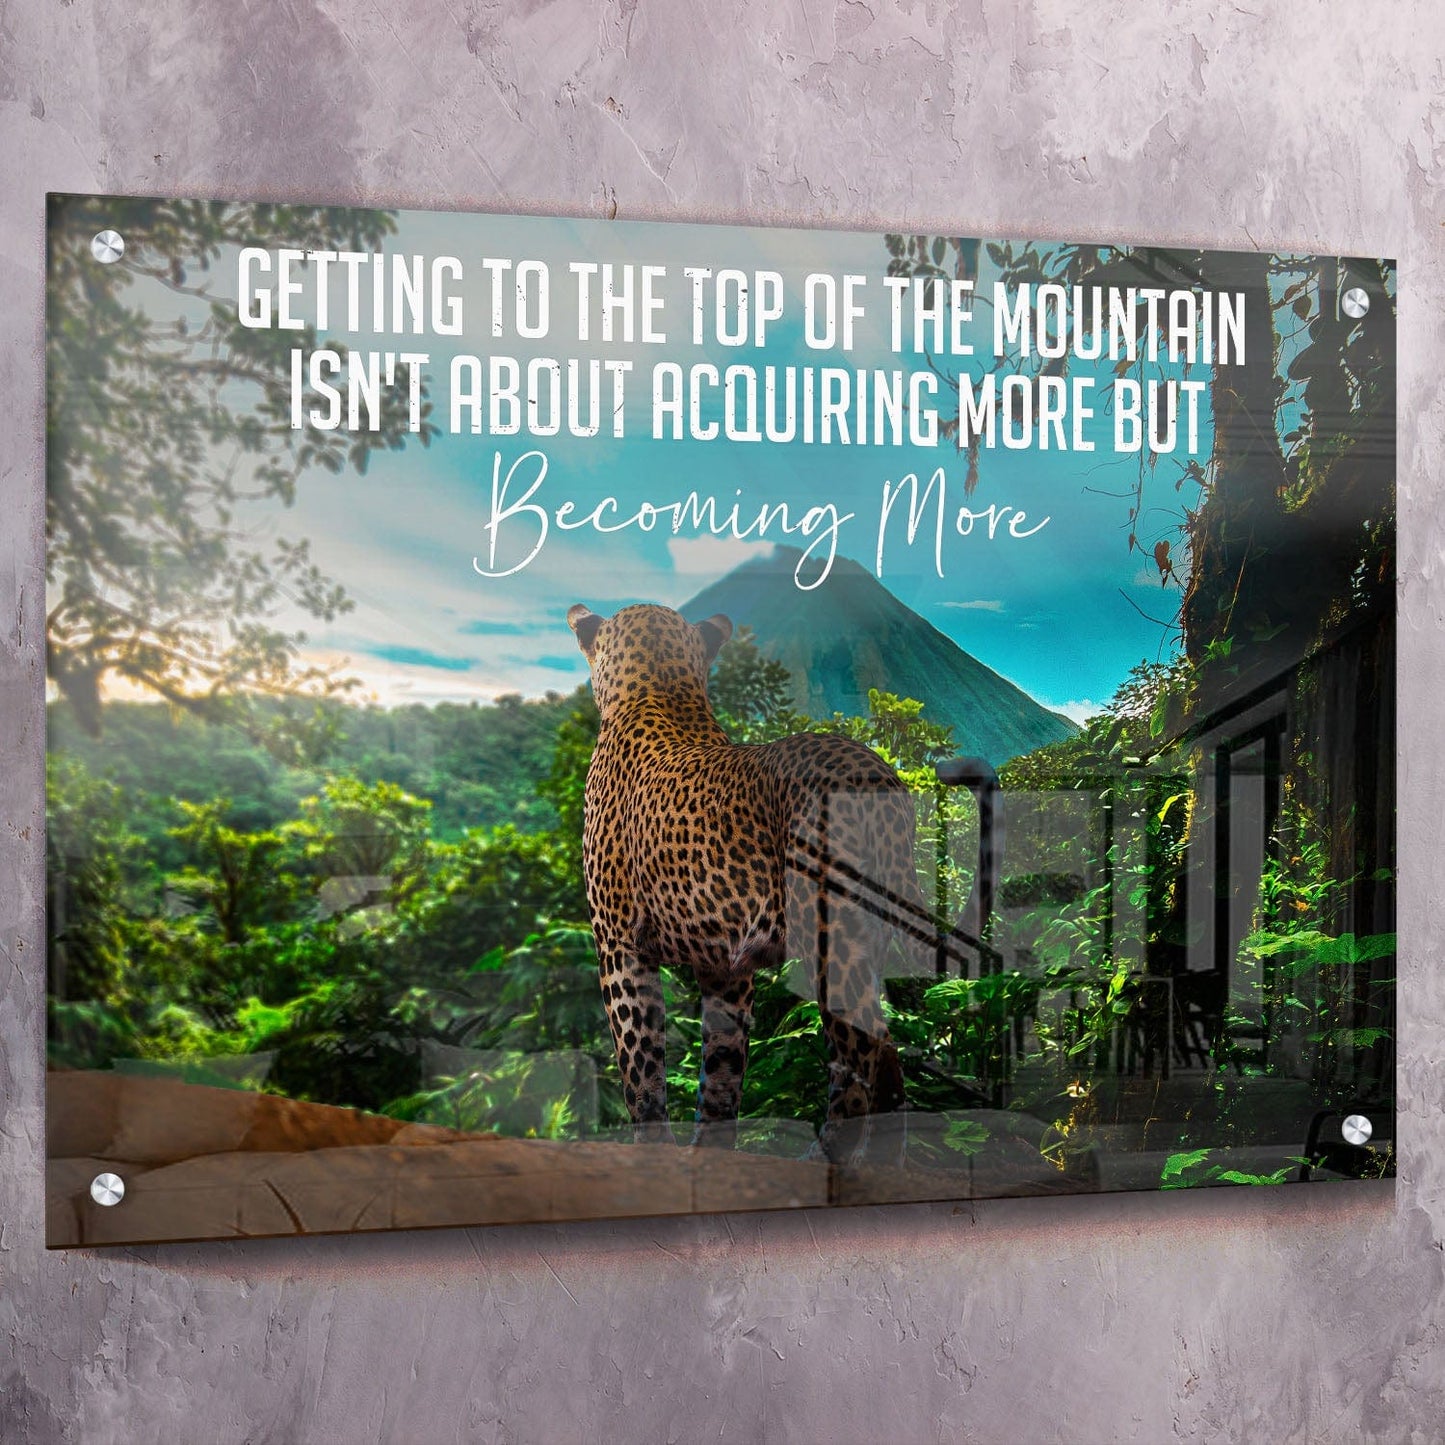 Becoming More Mountain Wall Art | Inspirational Wall Art Motivational Wall Art Quotes Office Art | ImpaktMaker Exclusive Canvas Art Landscape